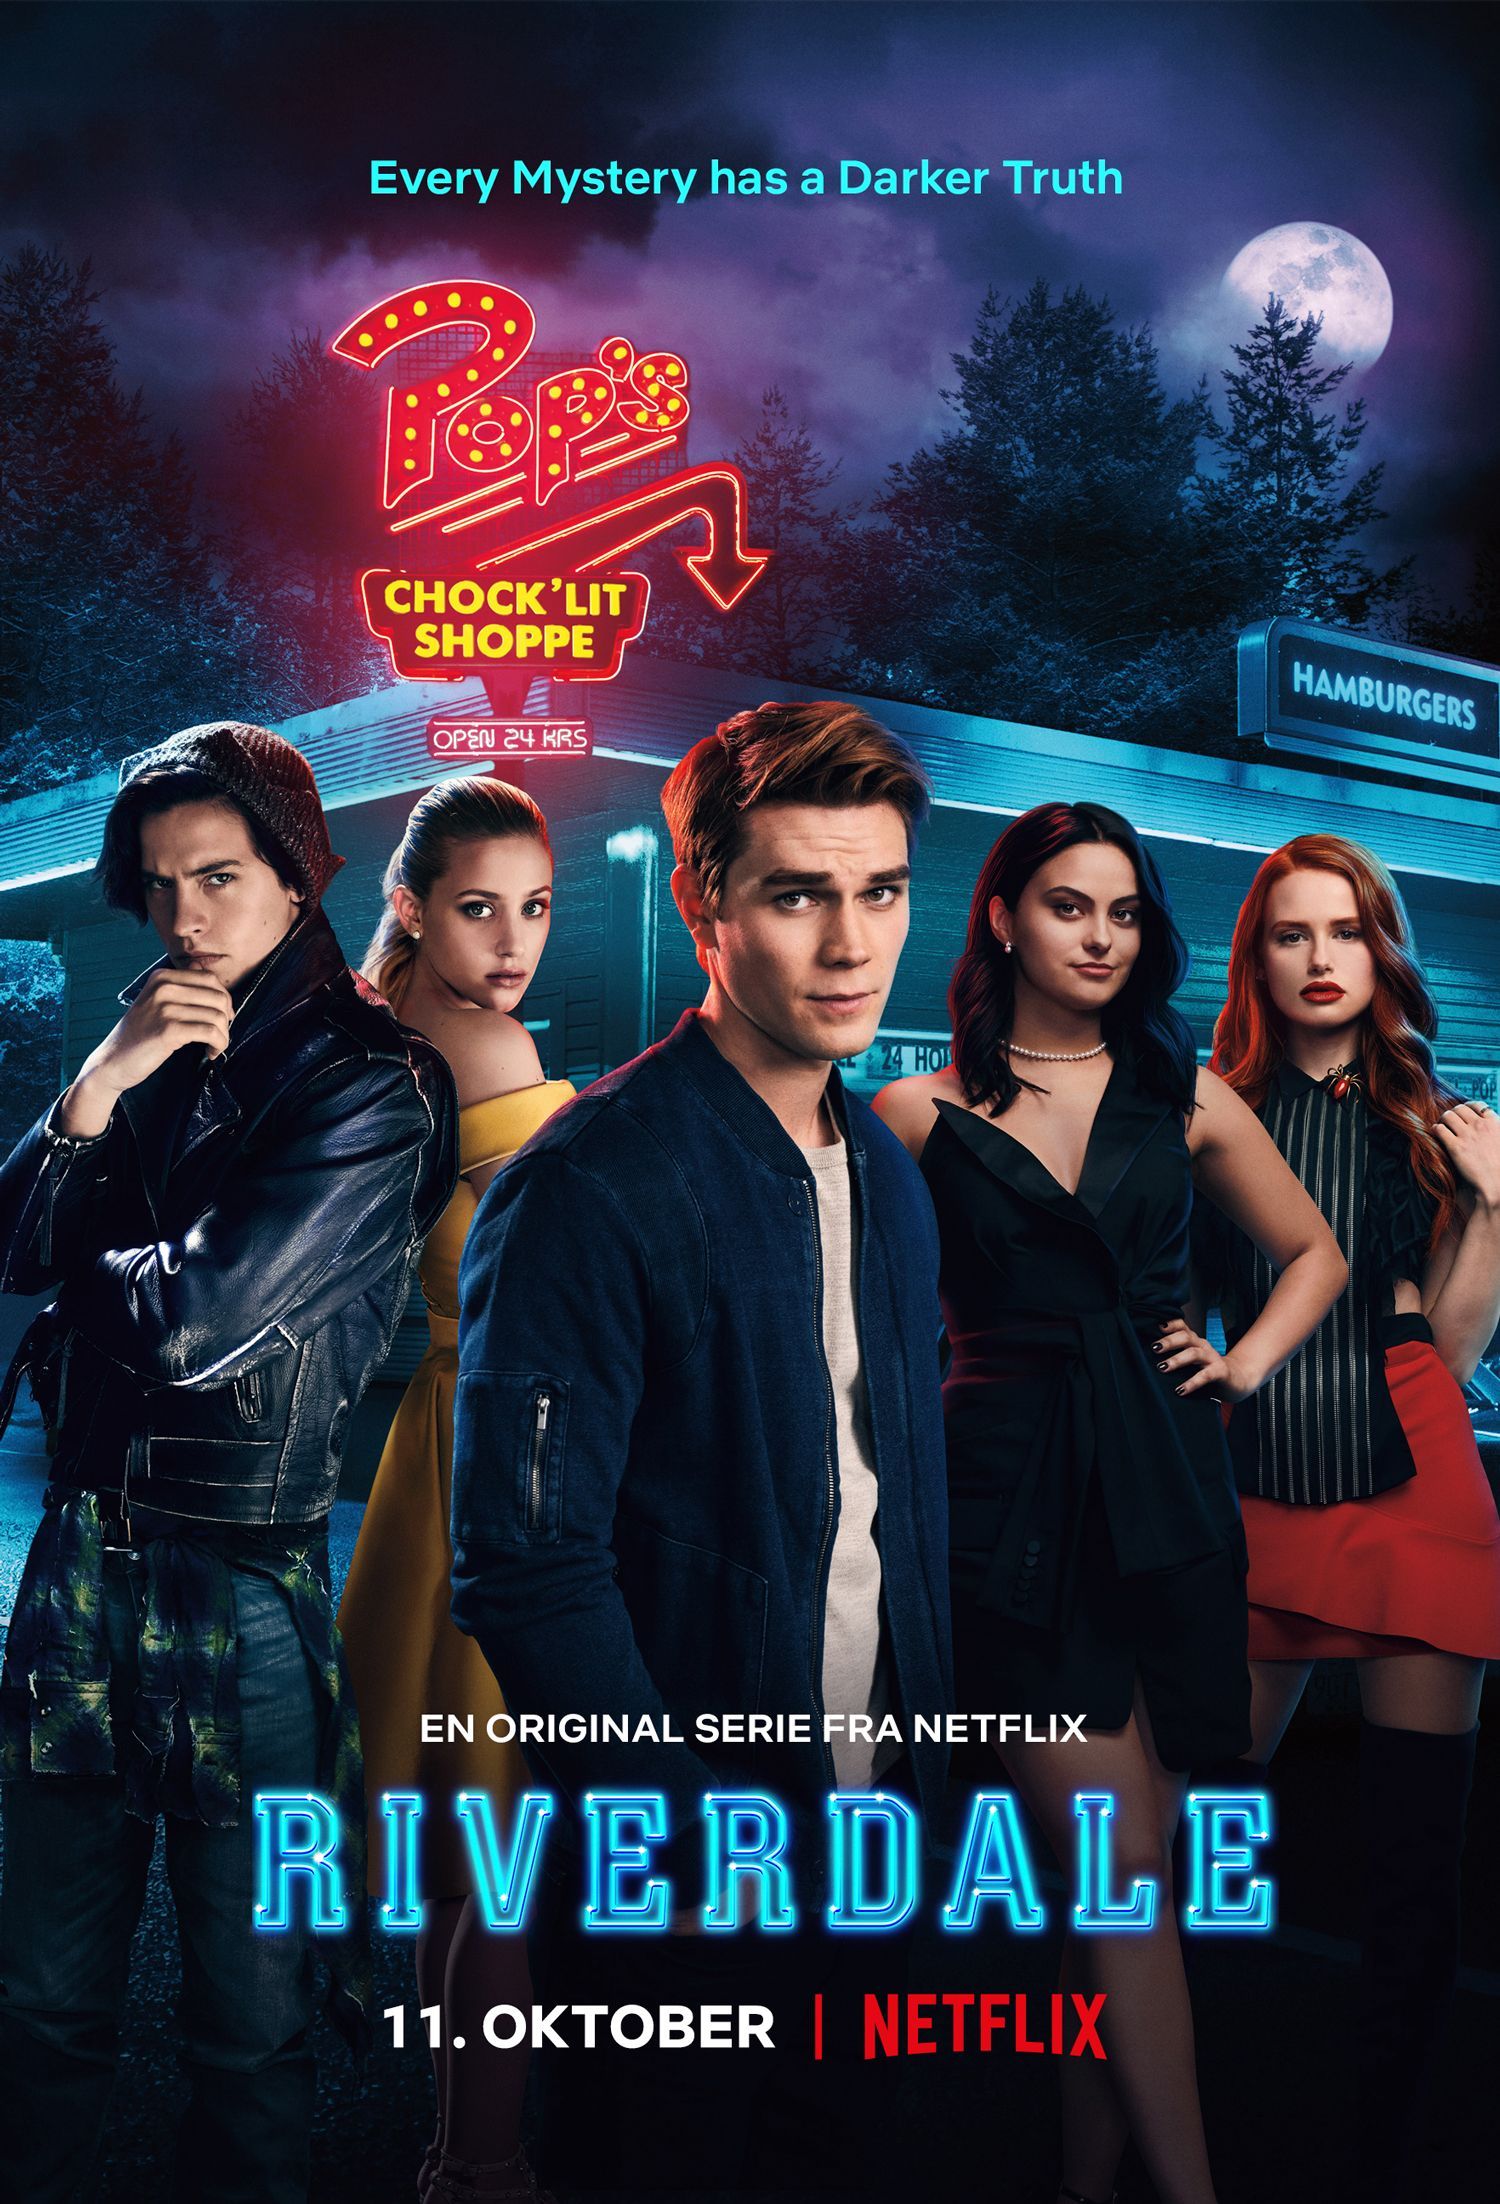 Riverdale Season 5 Guide to Release Date, Cast News and Spoilers